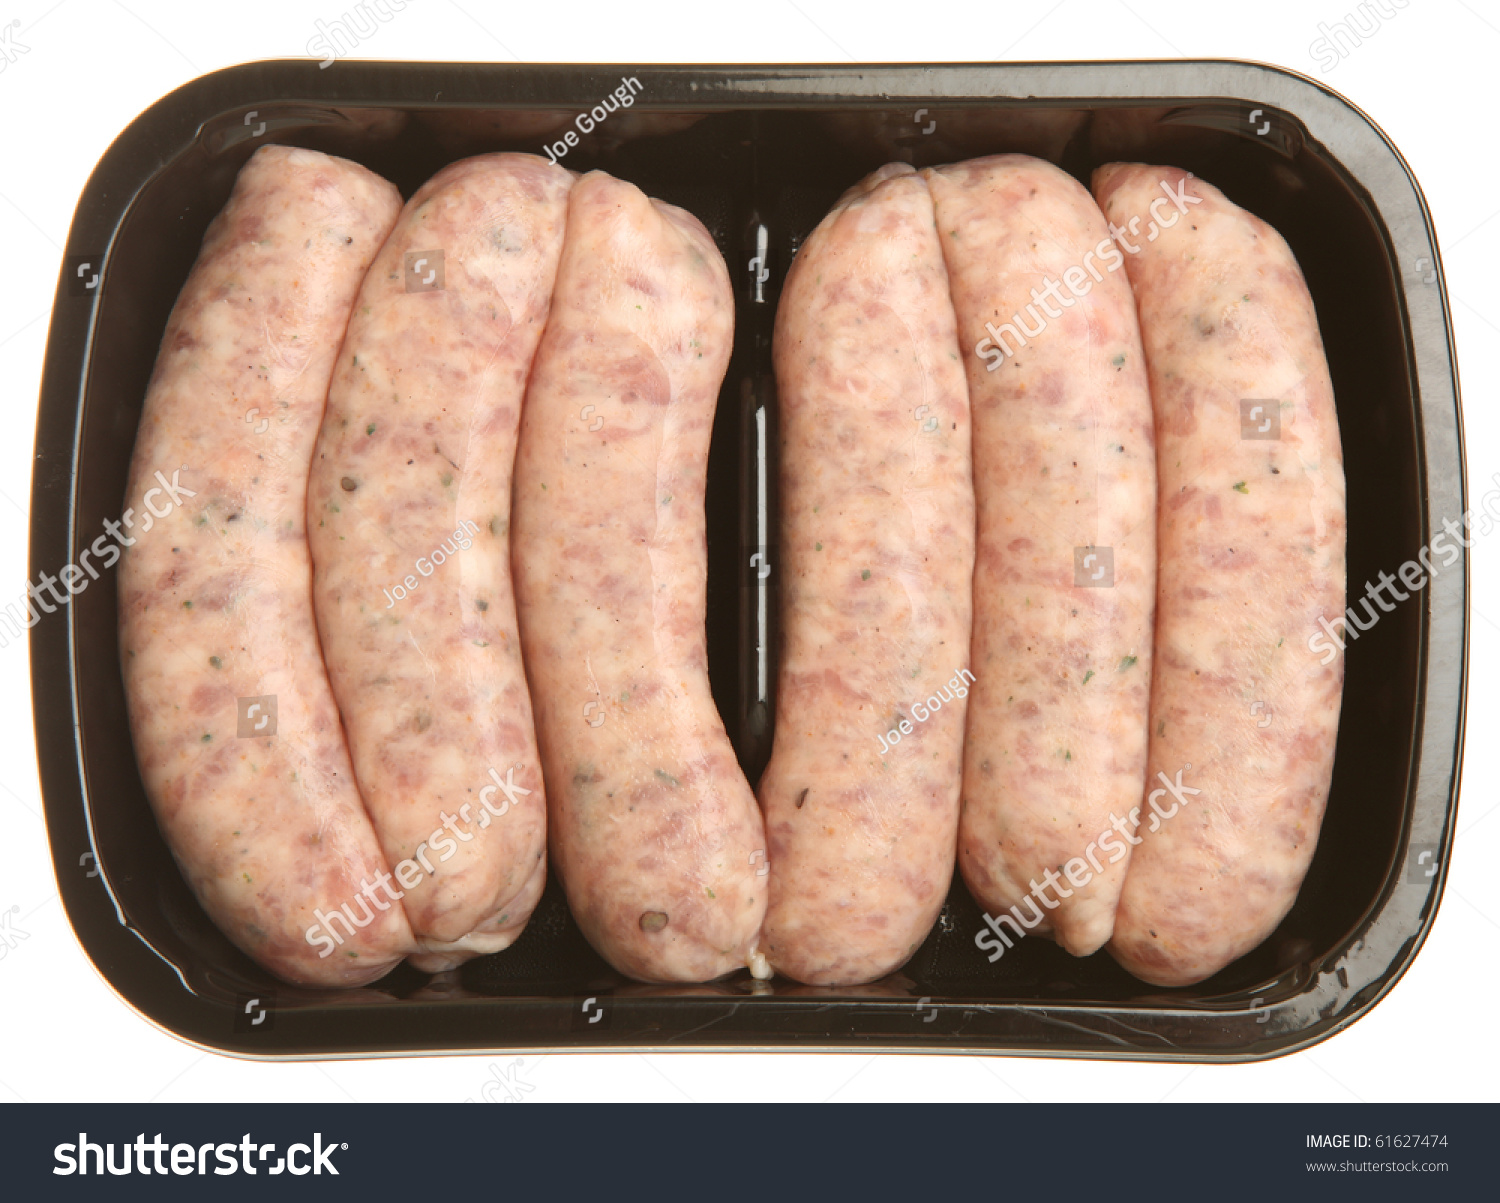 Download Pork Sausages Plastic Packaging Tray Food And Drink Stock Image 61627474 Yellowimages Mockups